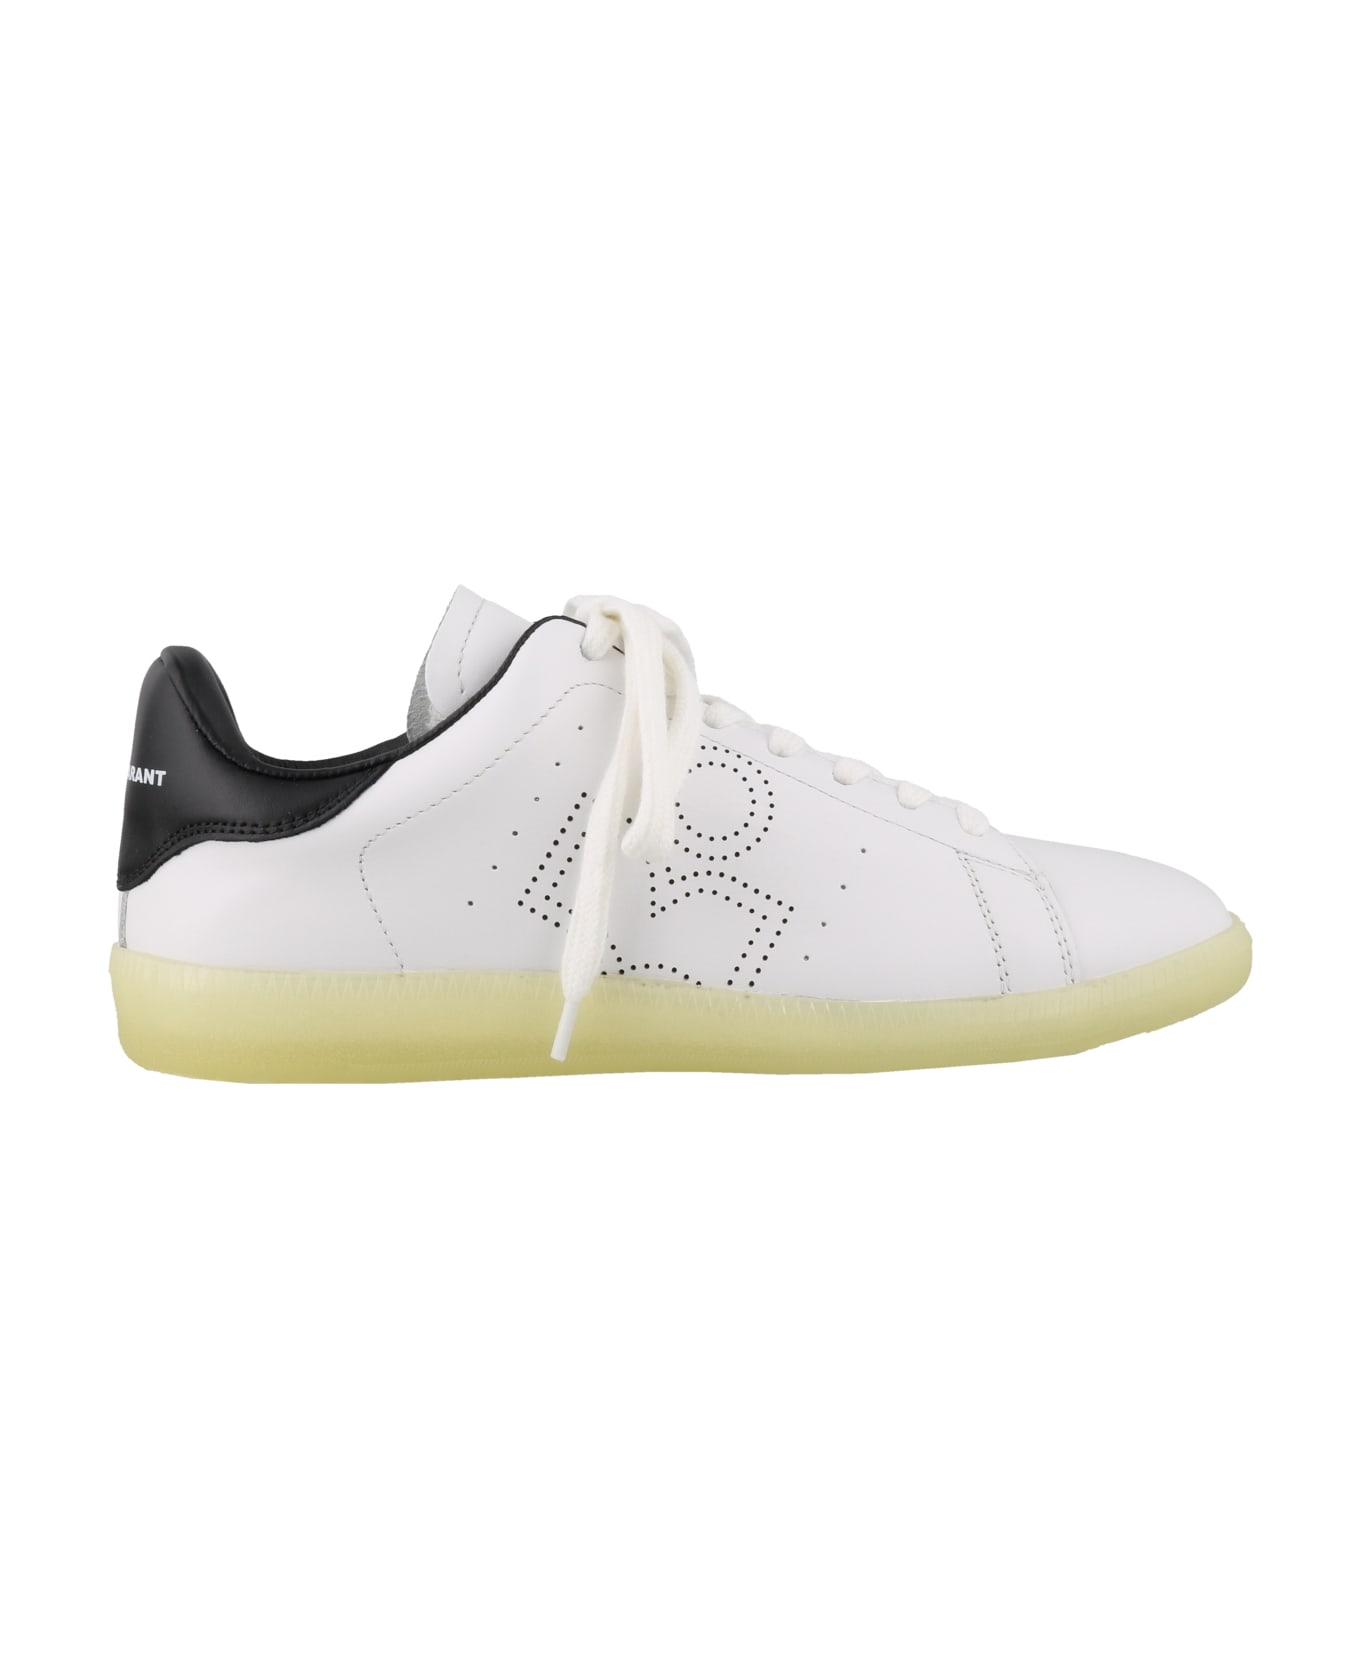 Isabel Marant Billyo Sneakers - Giallo